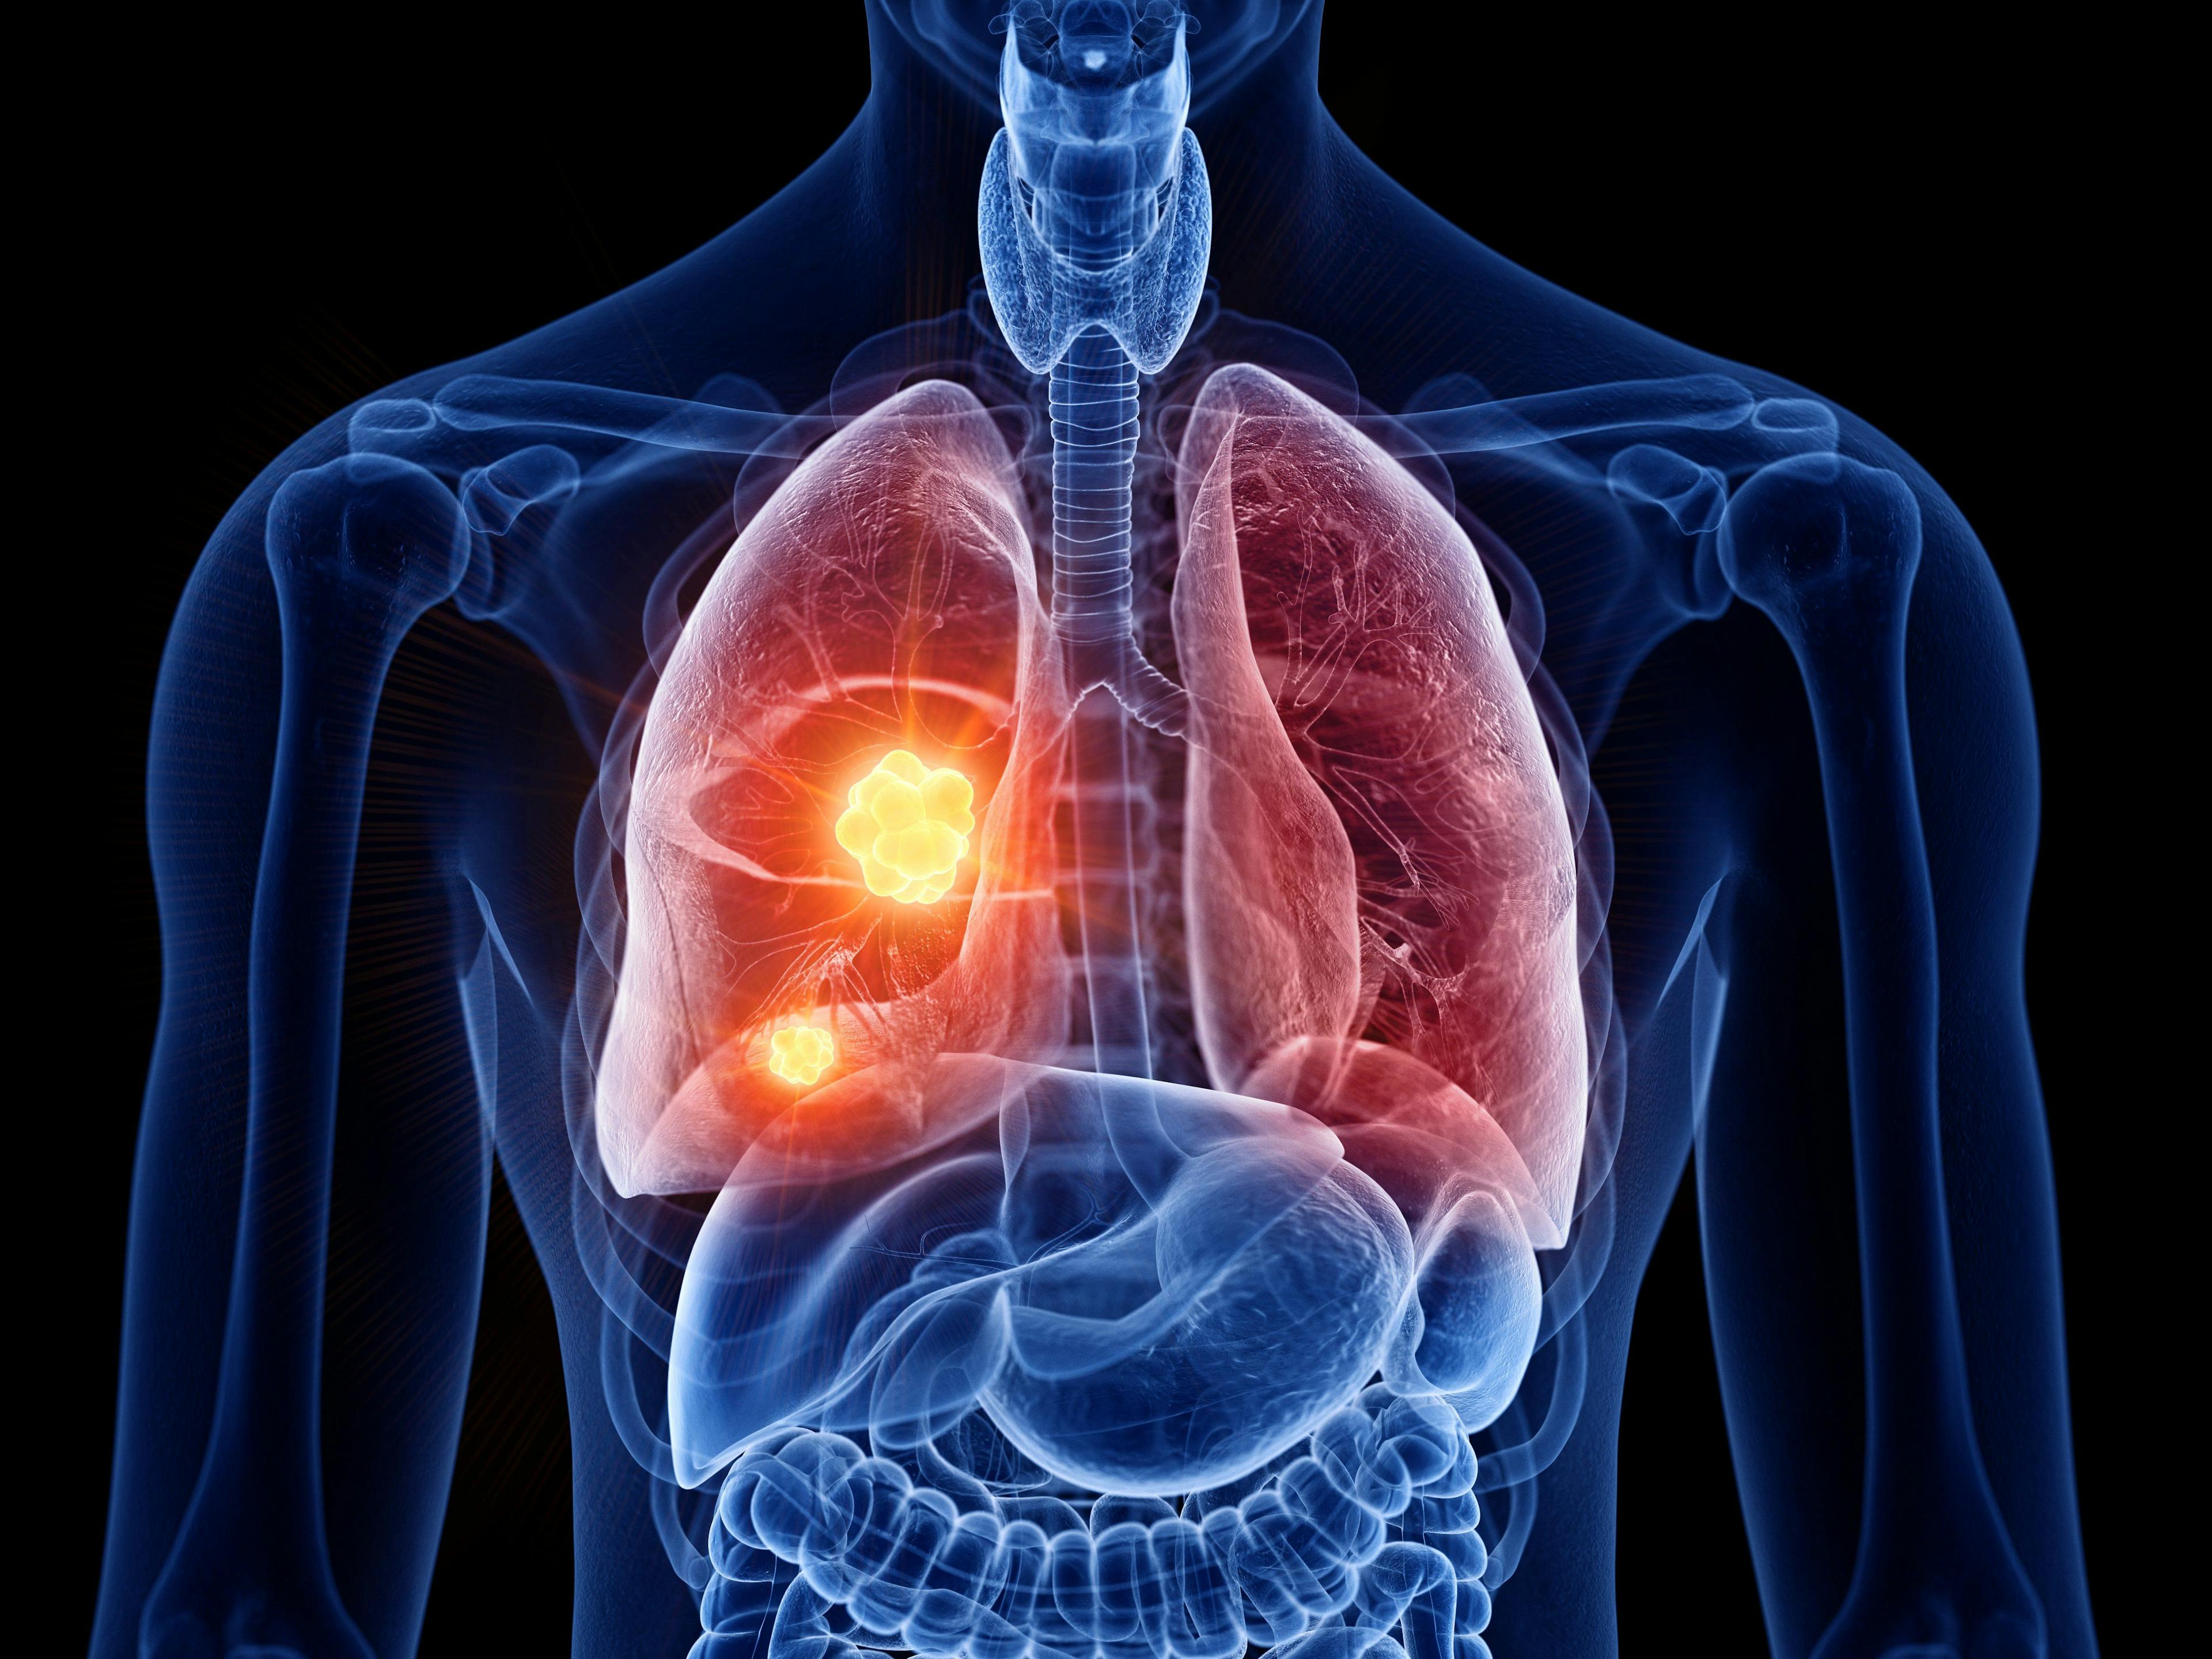 New lung cancer treatment launches